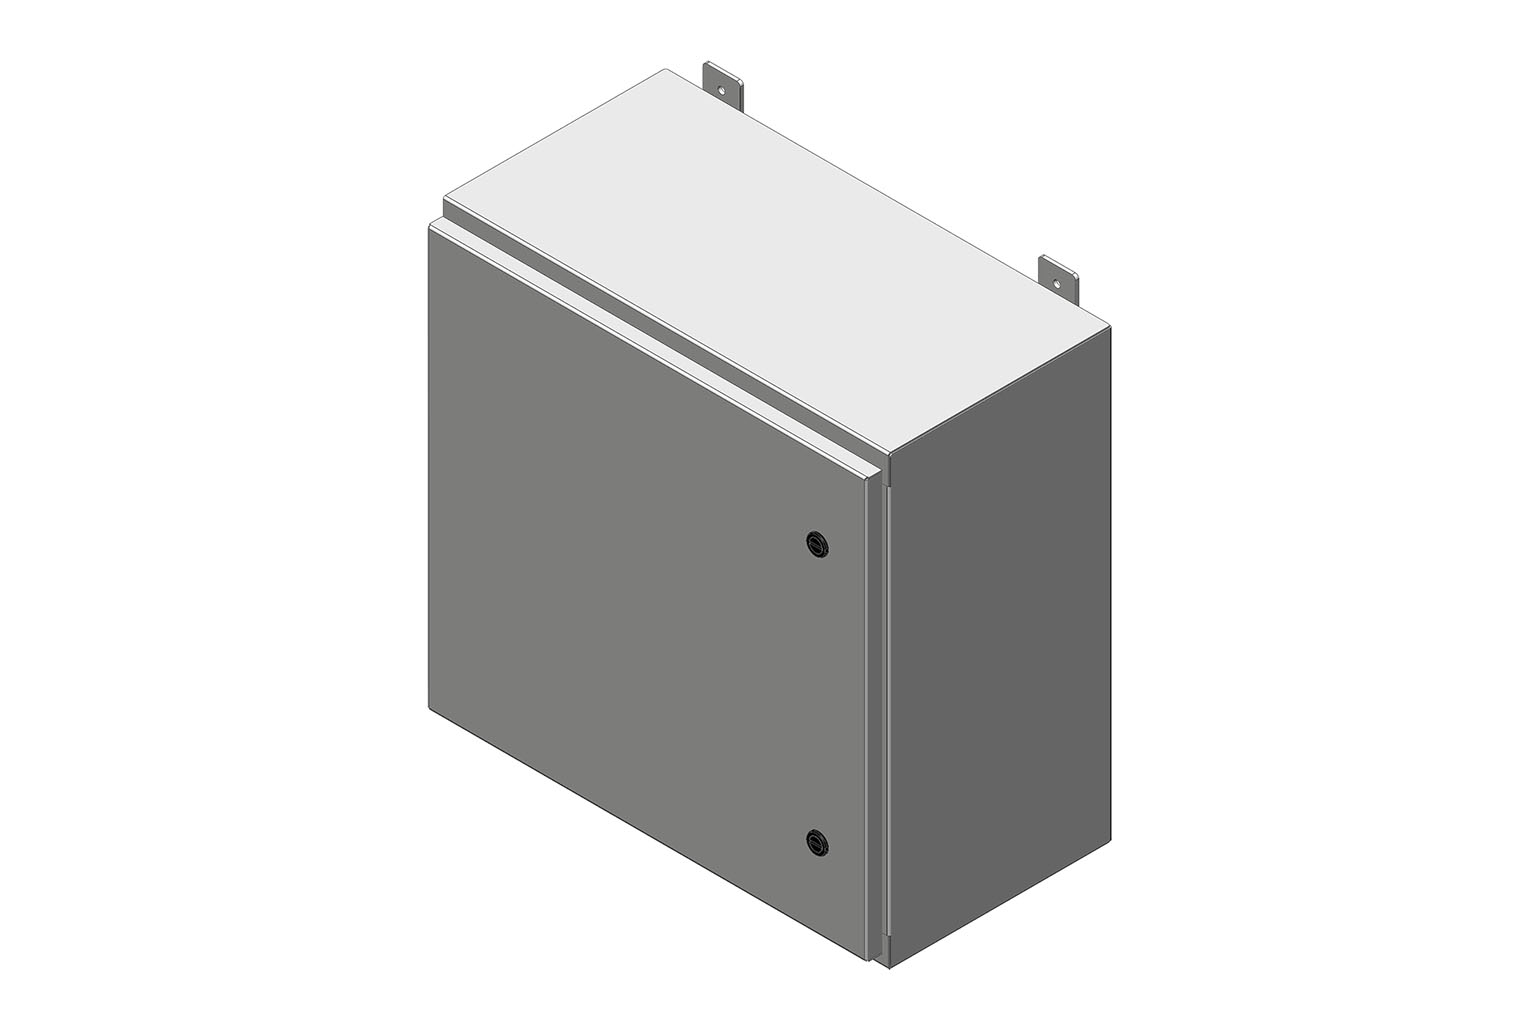 RMR Standard Wall-Mount Enclosure, Type 4 and 12 with Single Door Image